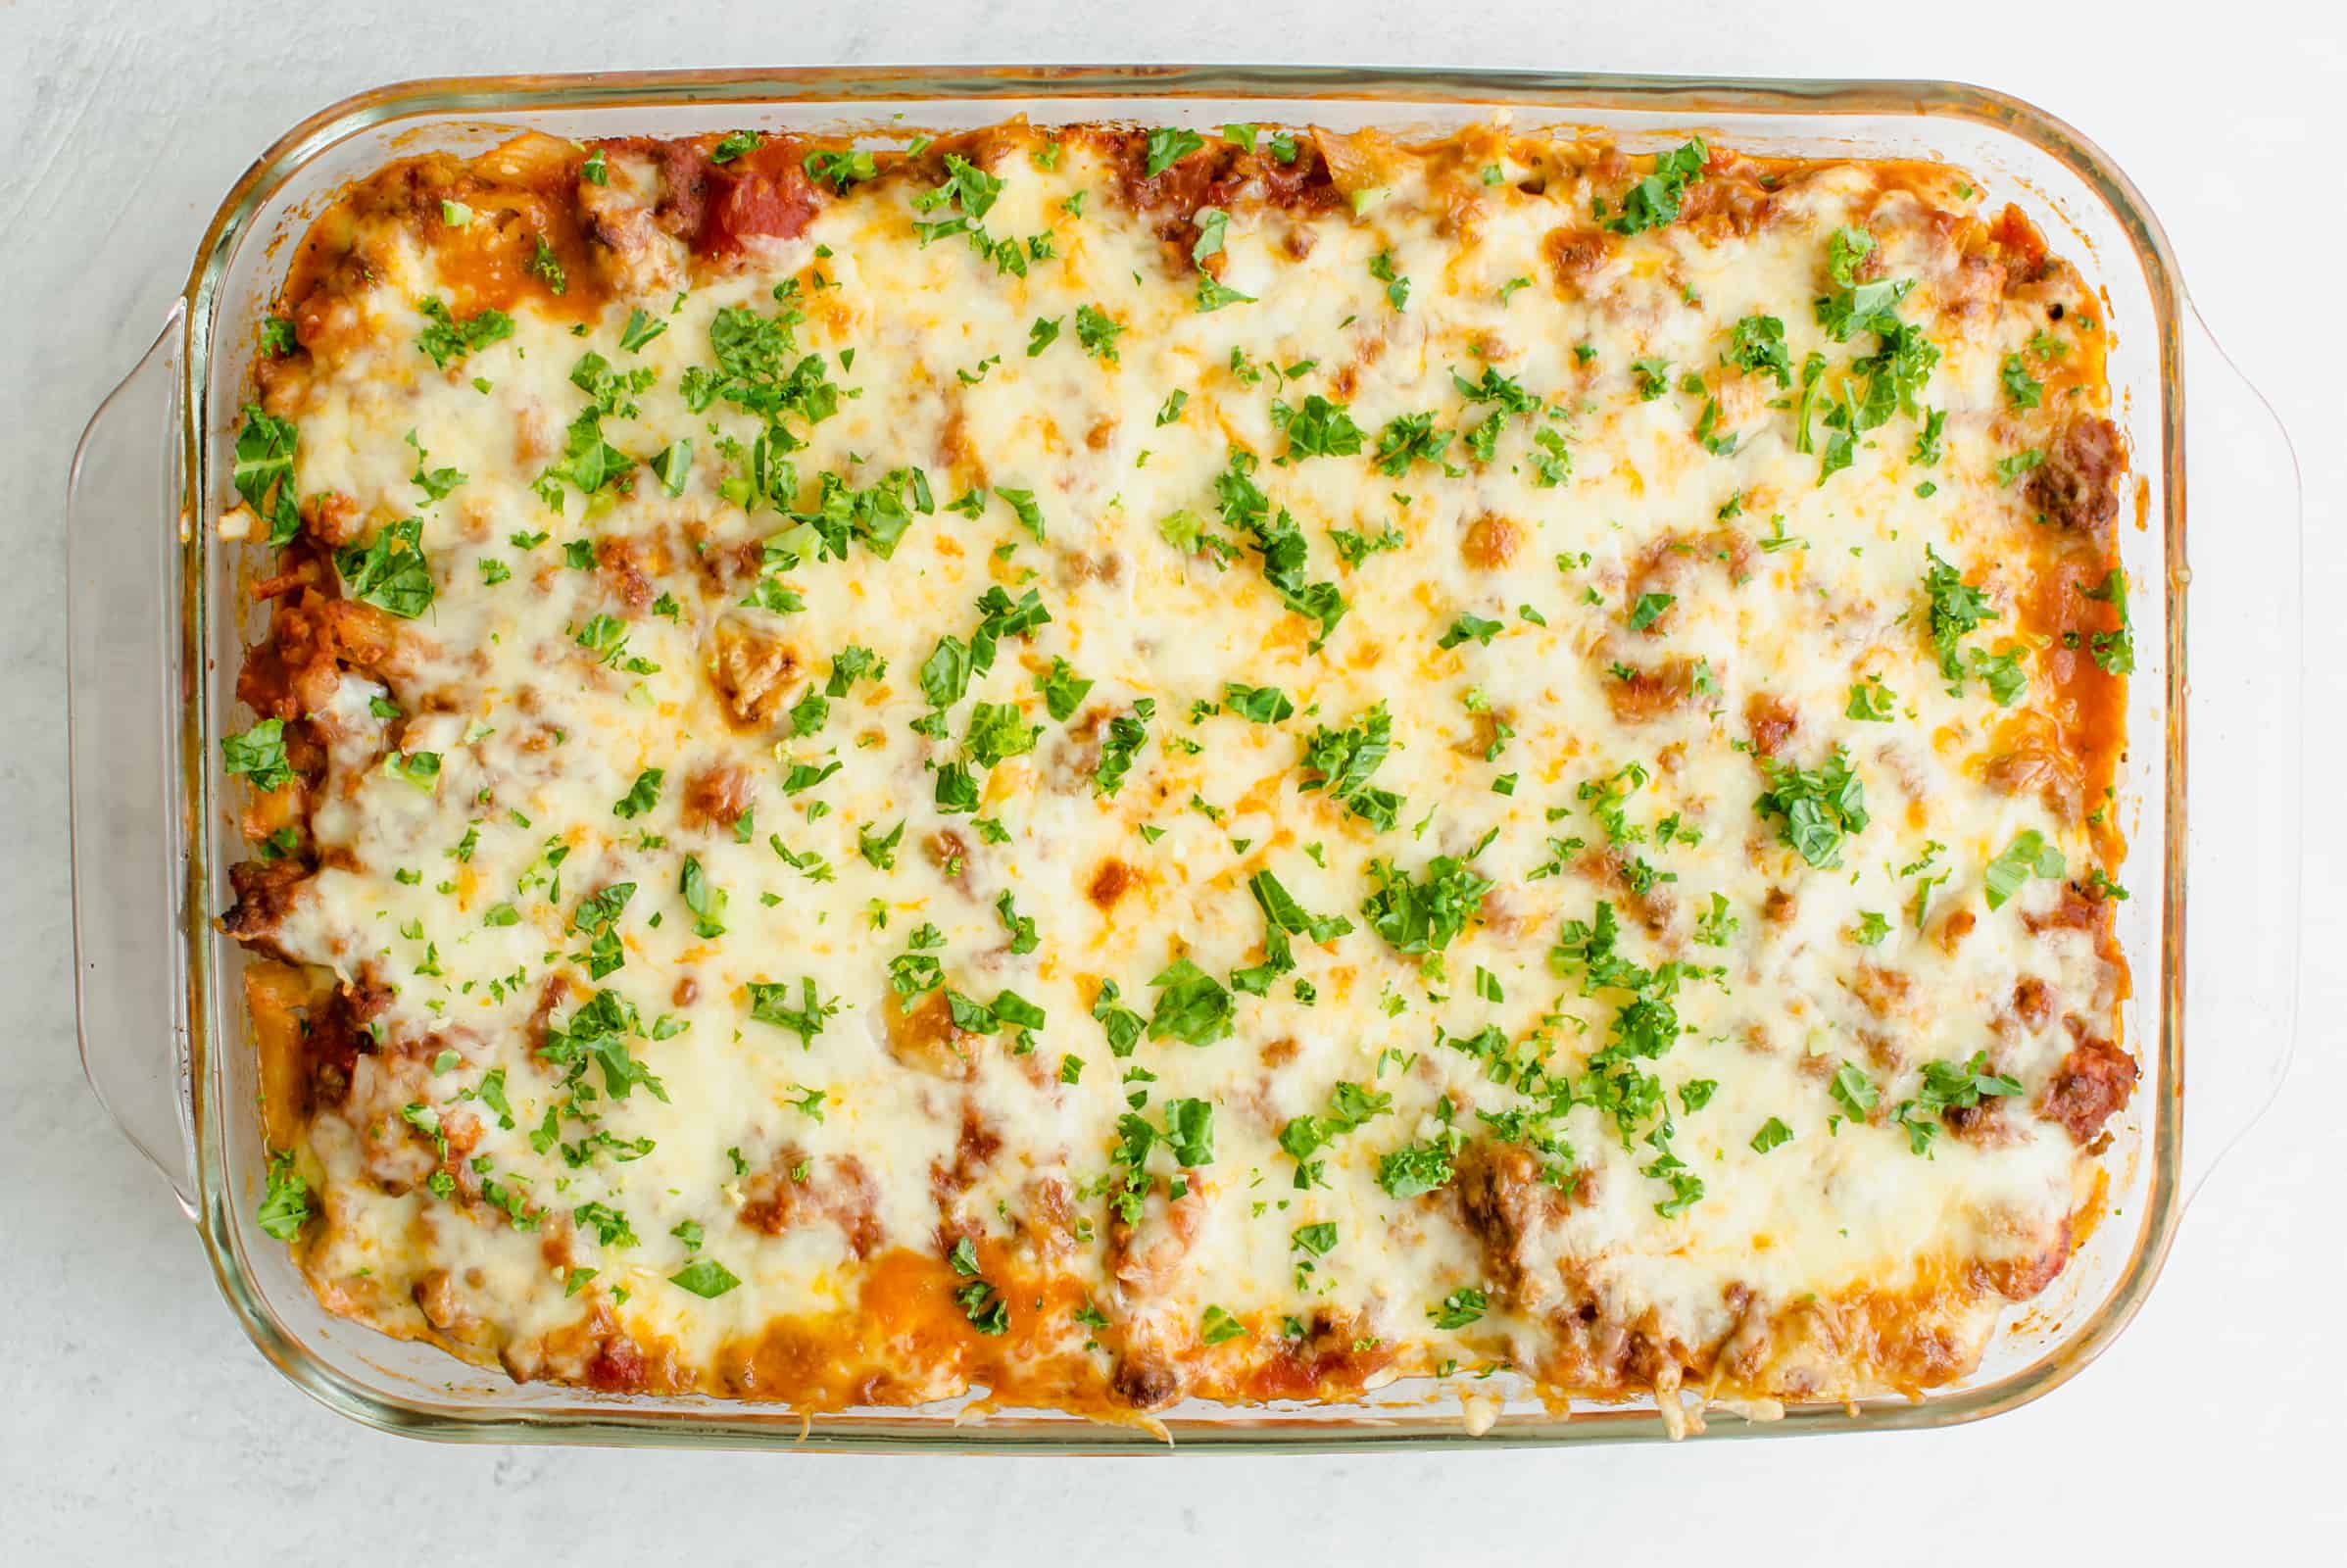 Baked penne pasta in a glass baking dish.